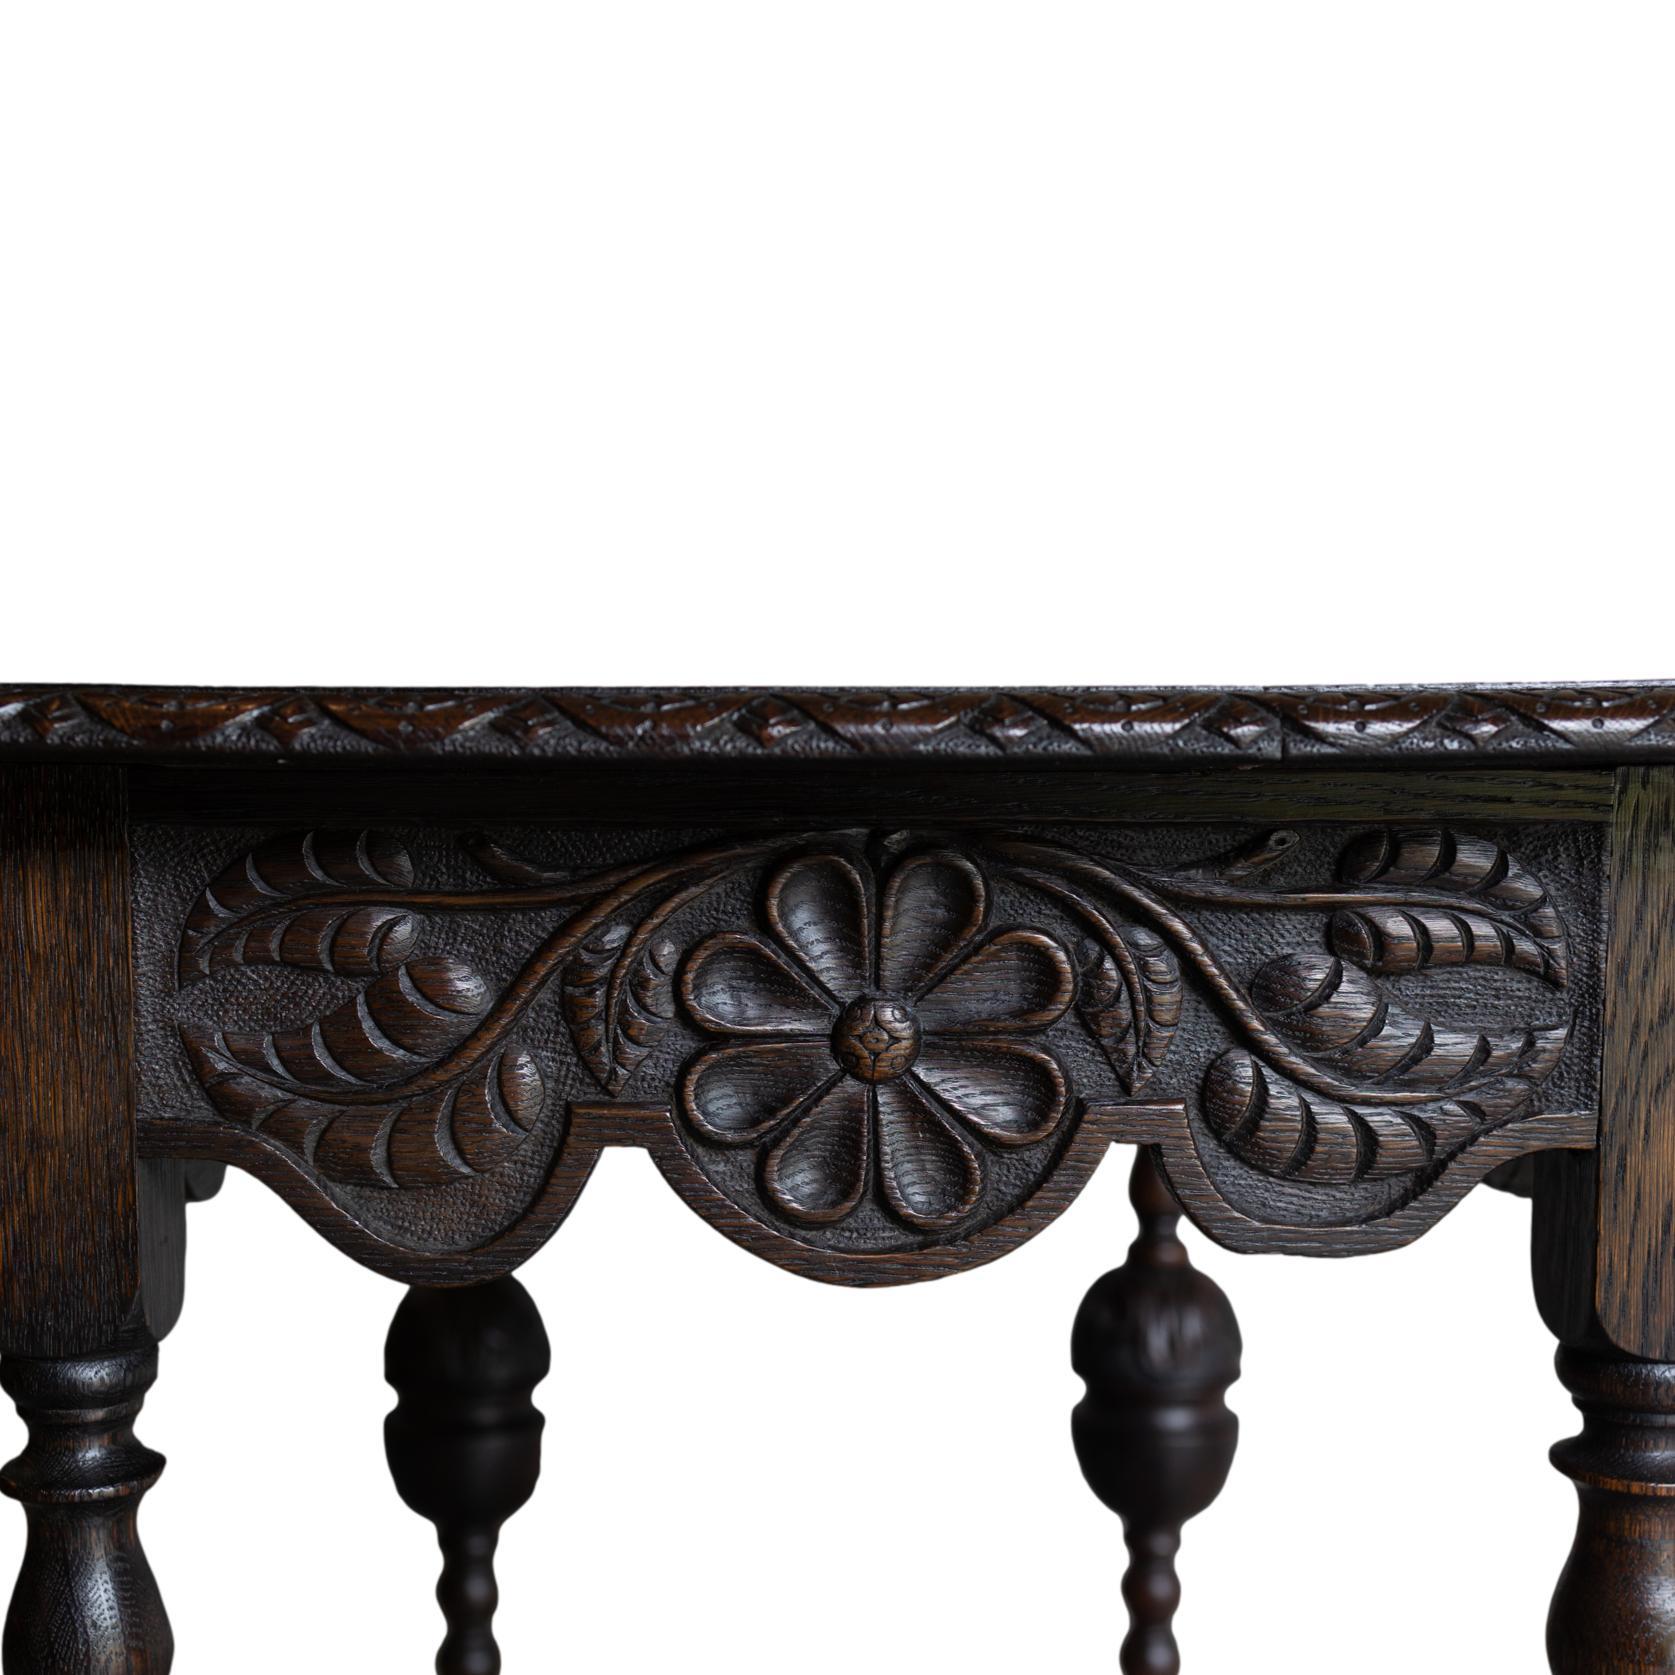 A Tudor-Style Carved Oak Center Table with Daisy Medallions, English, ca. 1880 For Sale 3